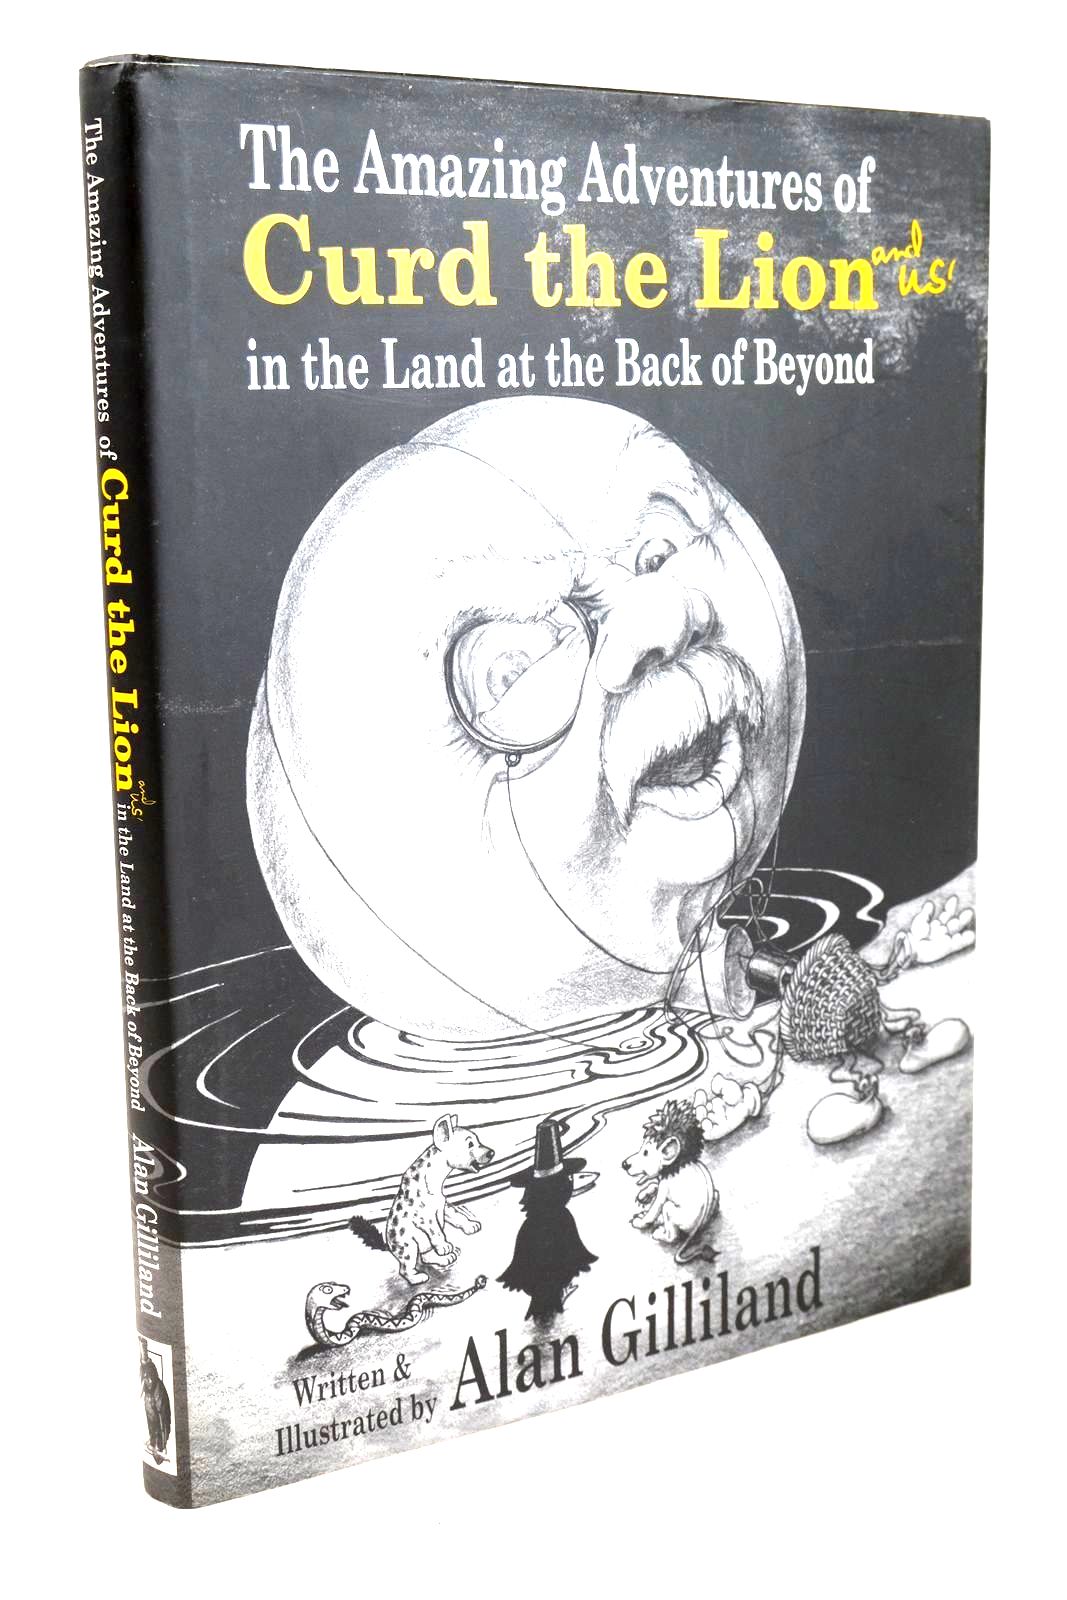 Photo of THE AMAZING ADVENTURES OF CURD THE LION AND US IN THE LAND AT THE BACK OF BEYOND written by Gilliland, Alan illustrated by Gilliland, Alan published by Shabby Tattler Press, Raven's Quill Ltd (STOCK CODE: 1326462)  for sale by Stella & Rose's Books